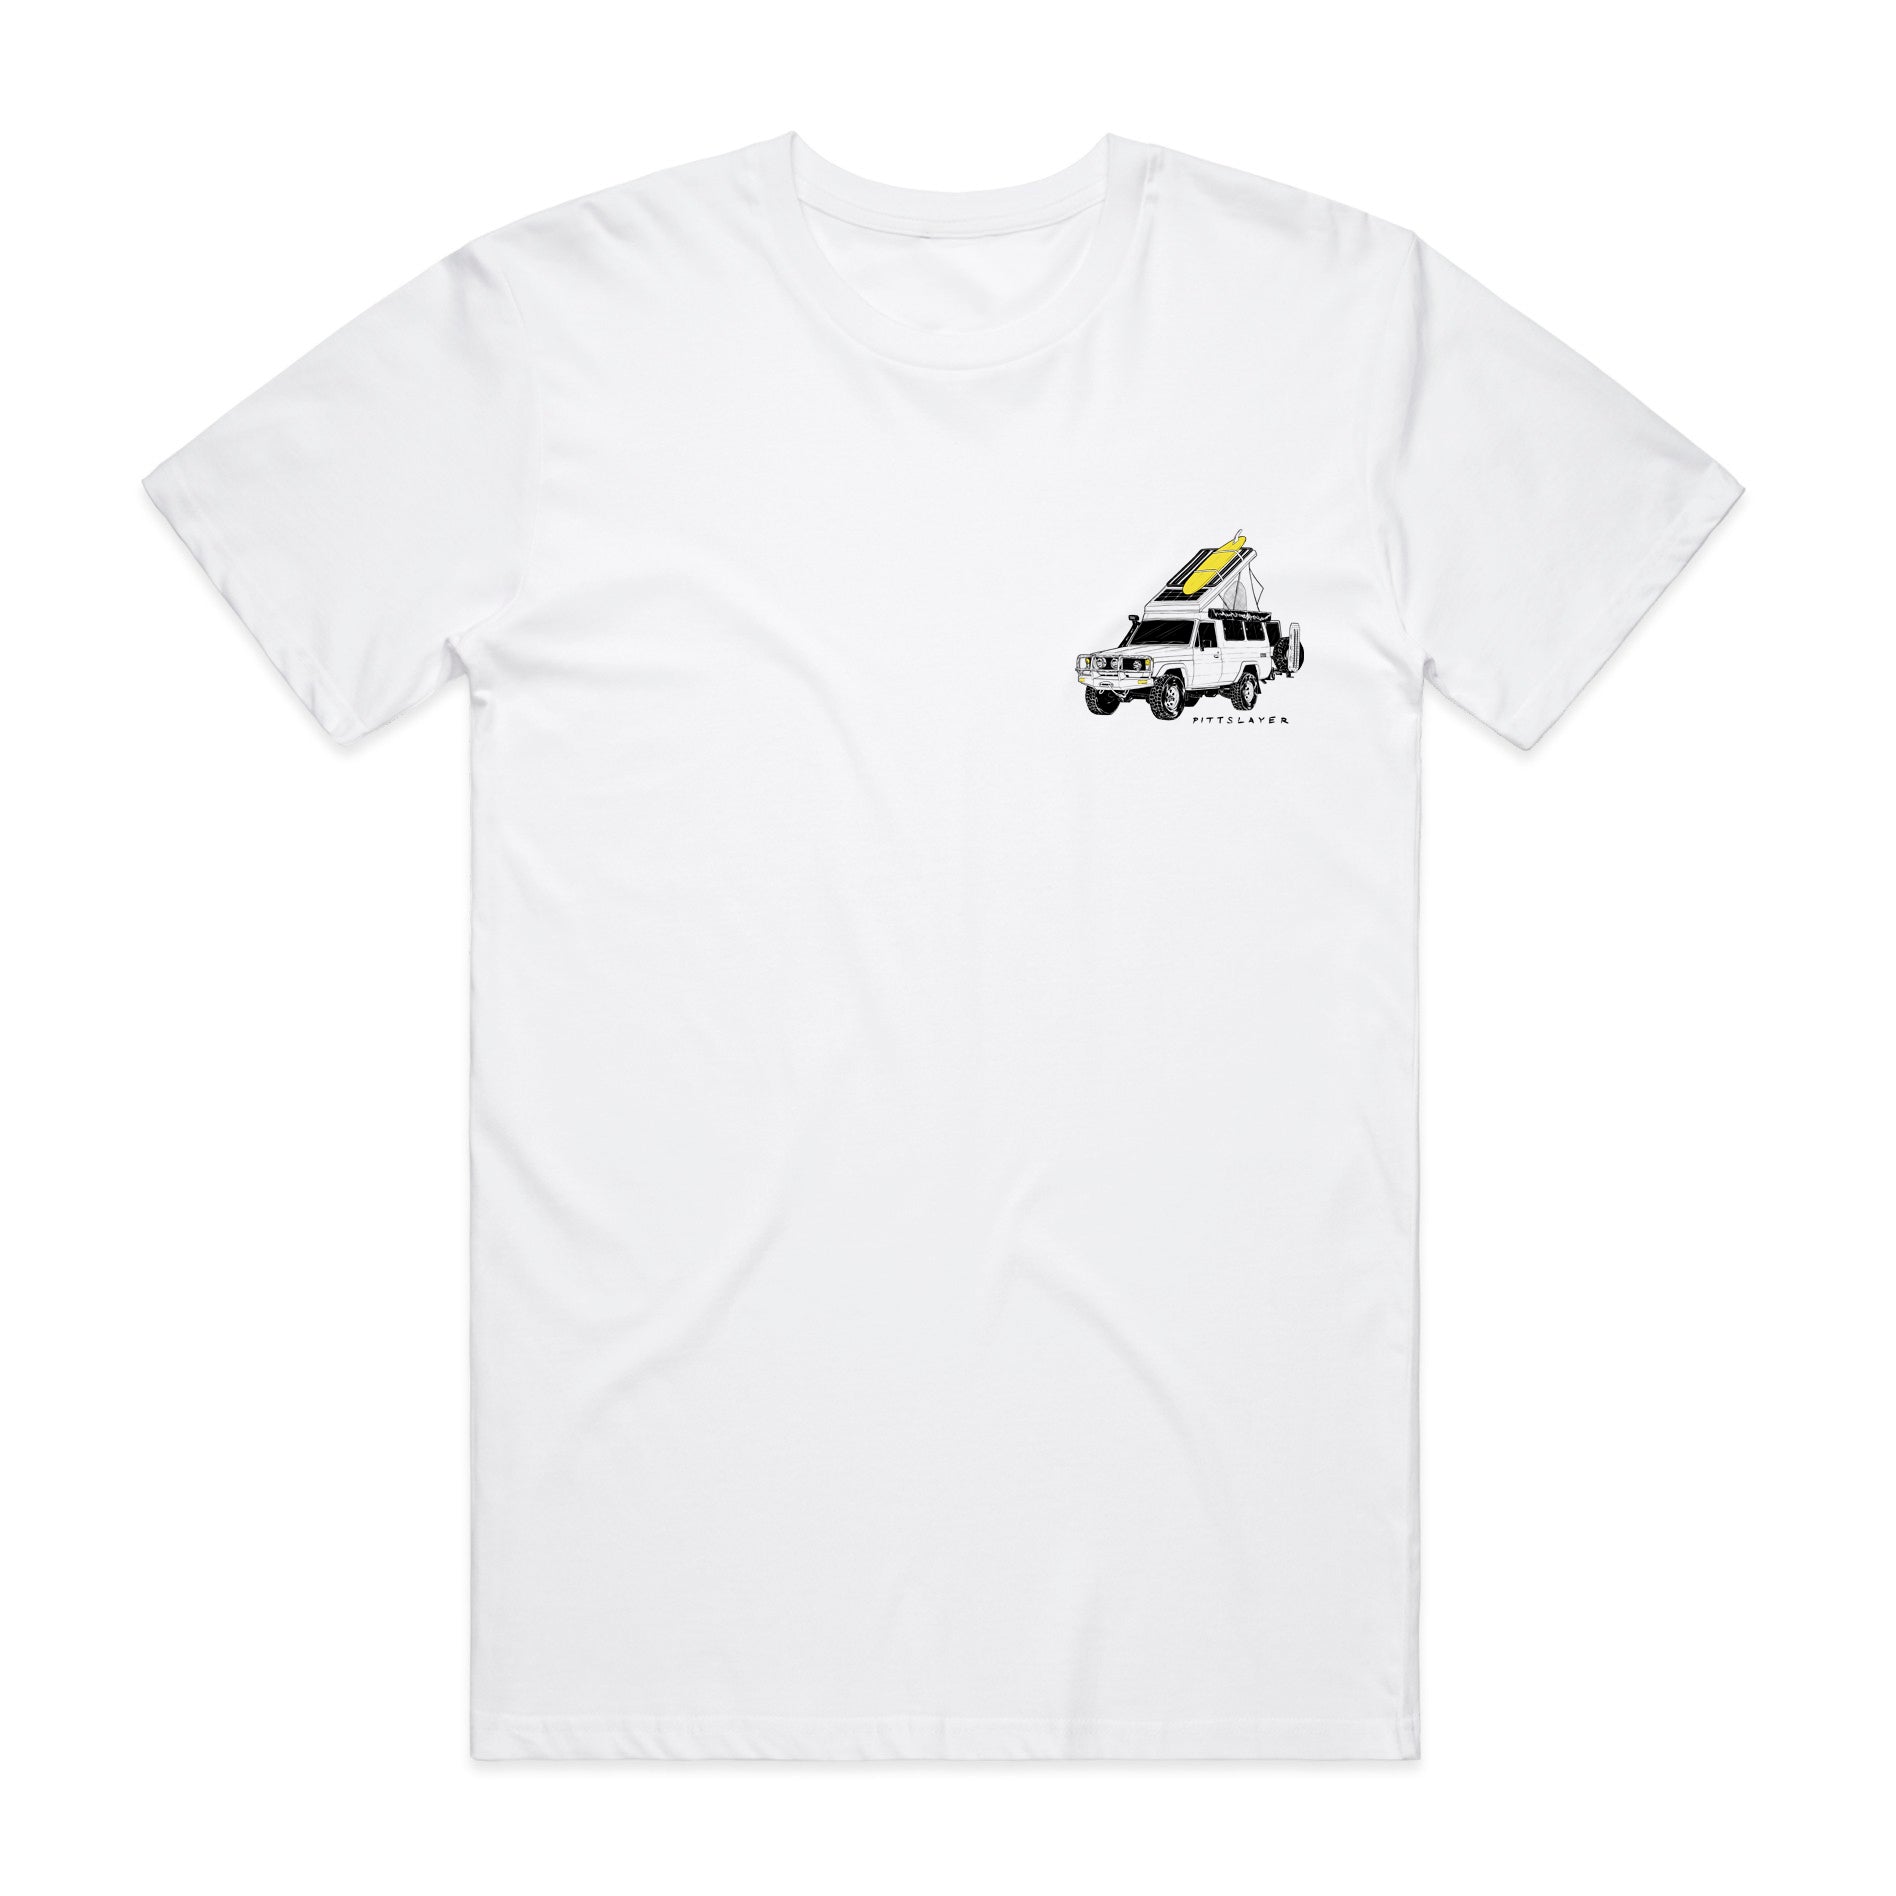 Troopy Tee - White/Yellow